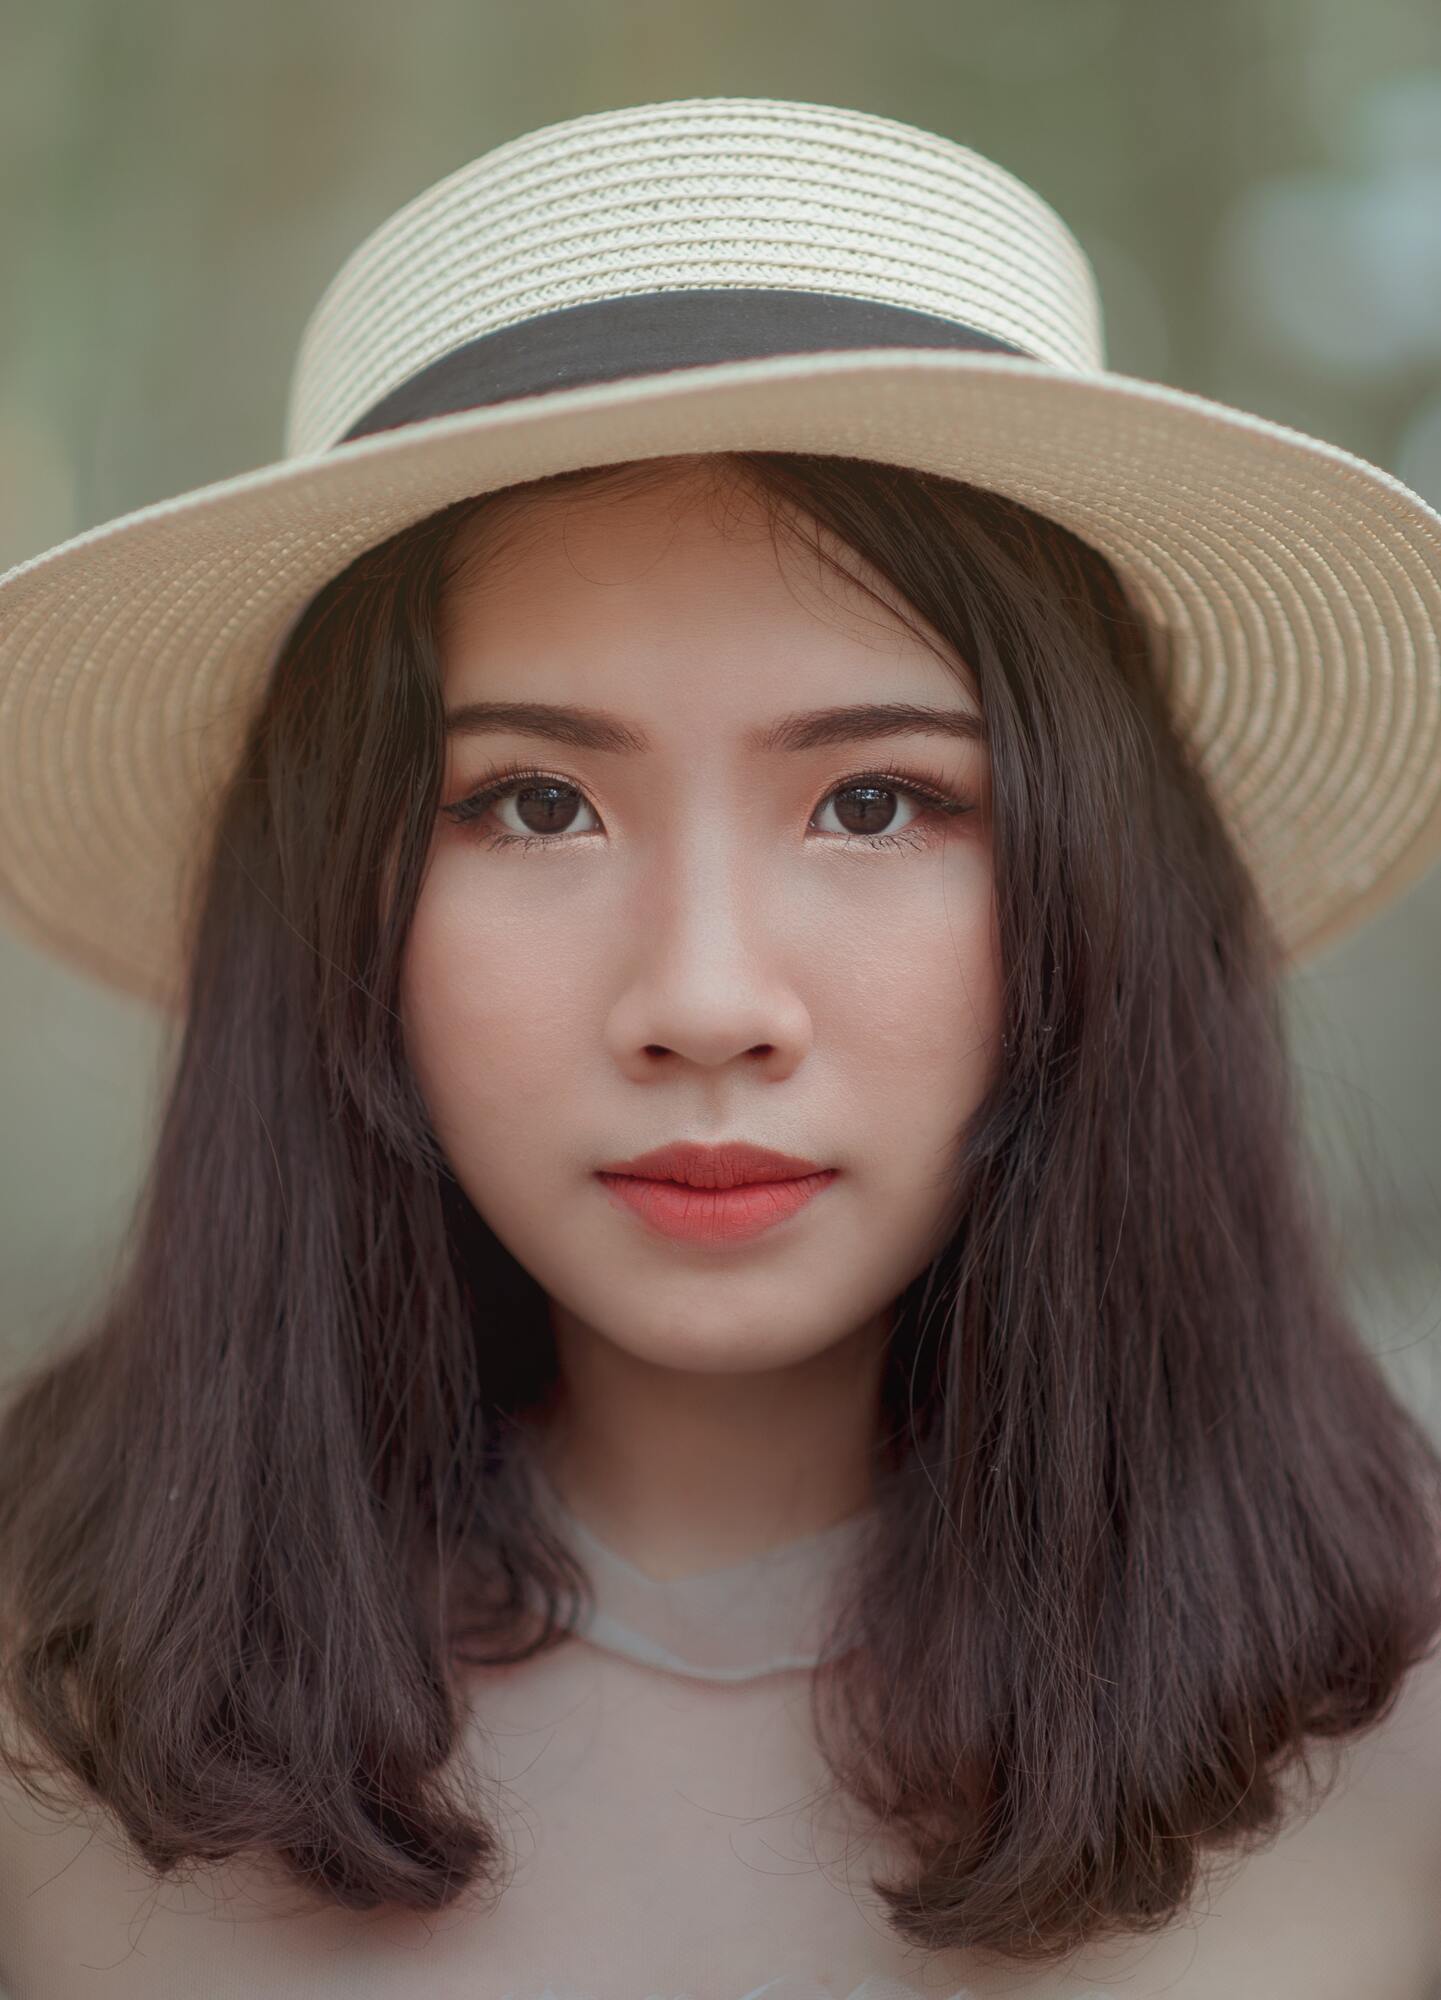 Seven makeup secrets from Japanese women that will make you look 10 years younger. Photo